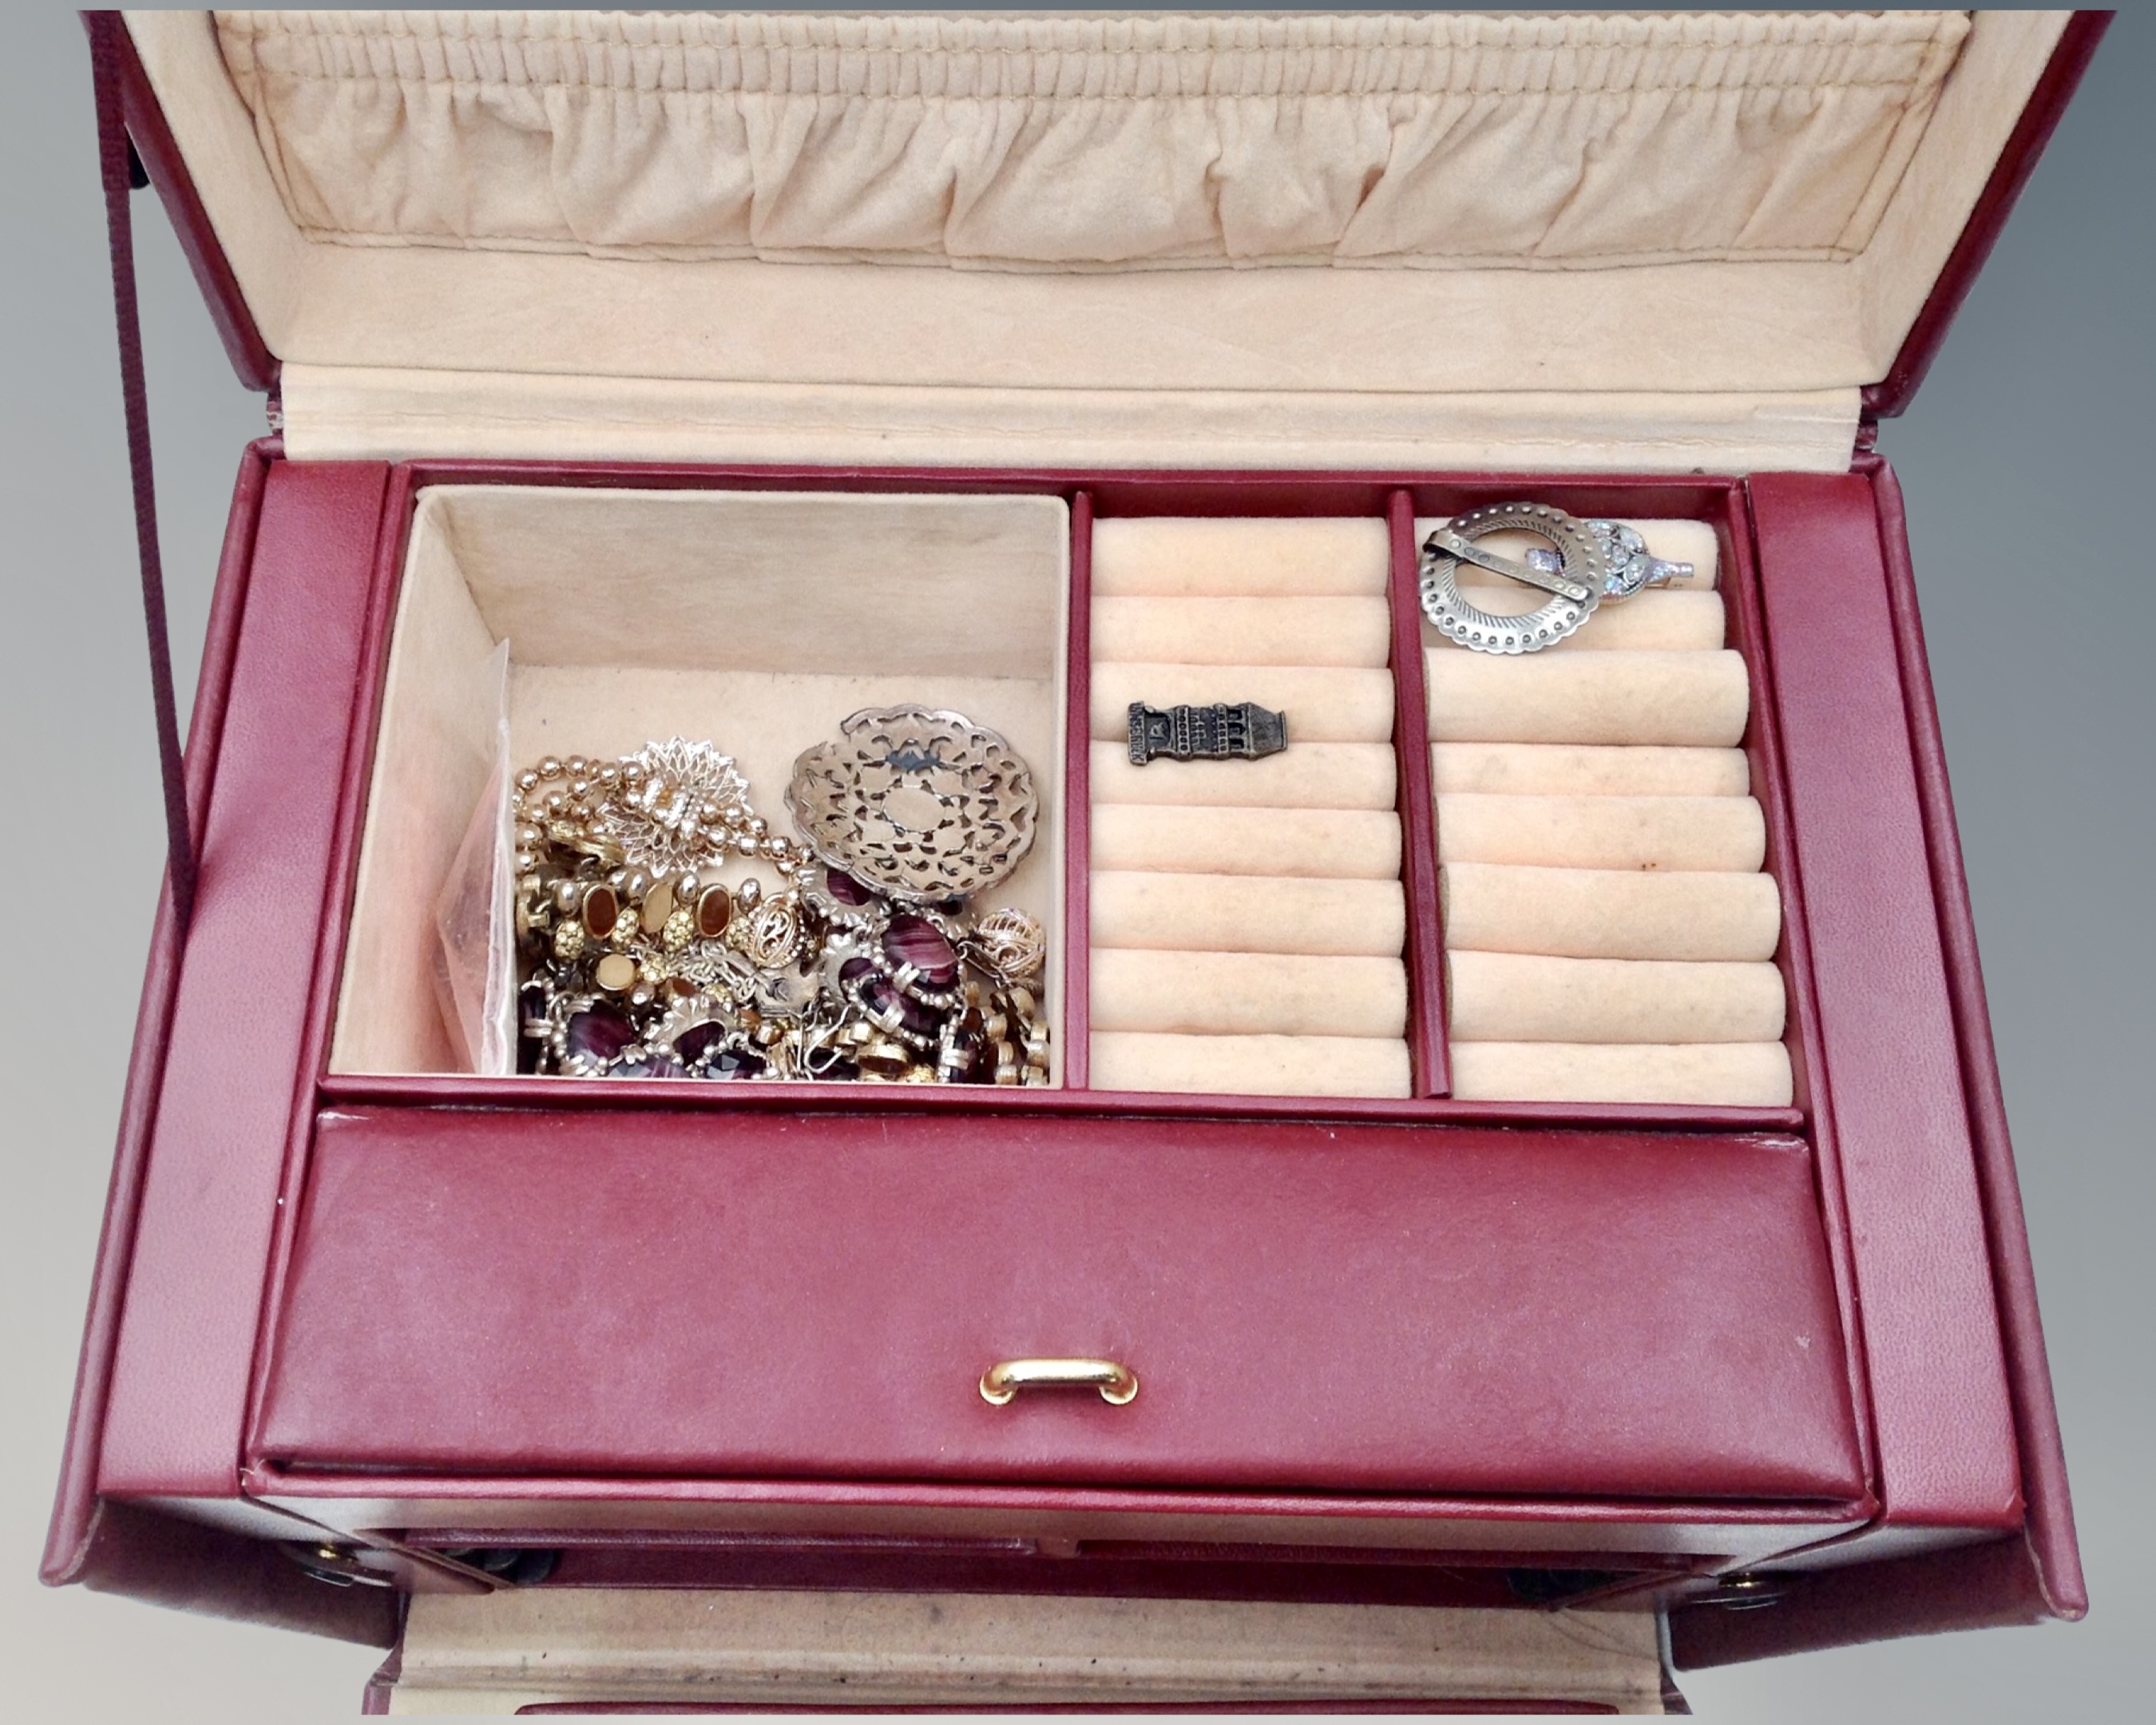 A contemporary jewellery chest containing costume brooches, earrings, necklaces etc. - Image 2 of 2